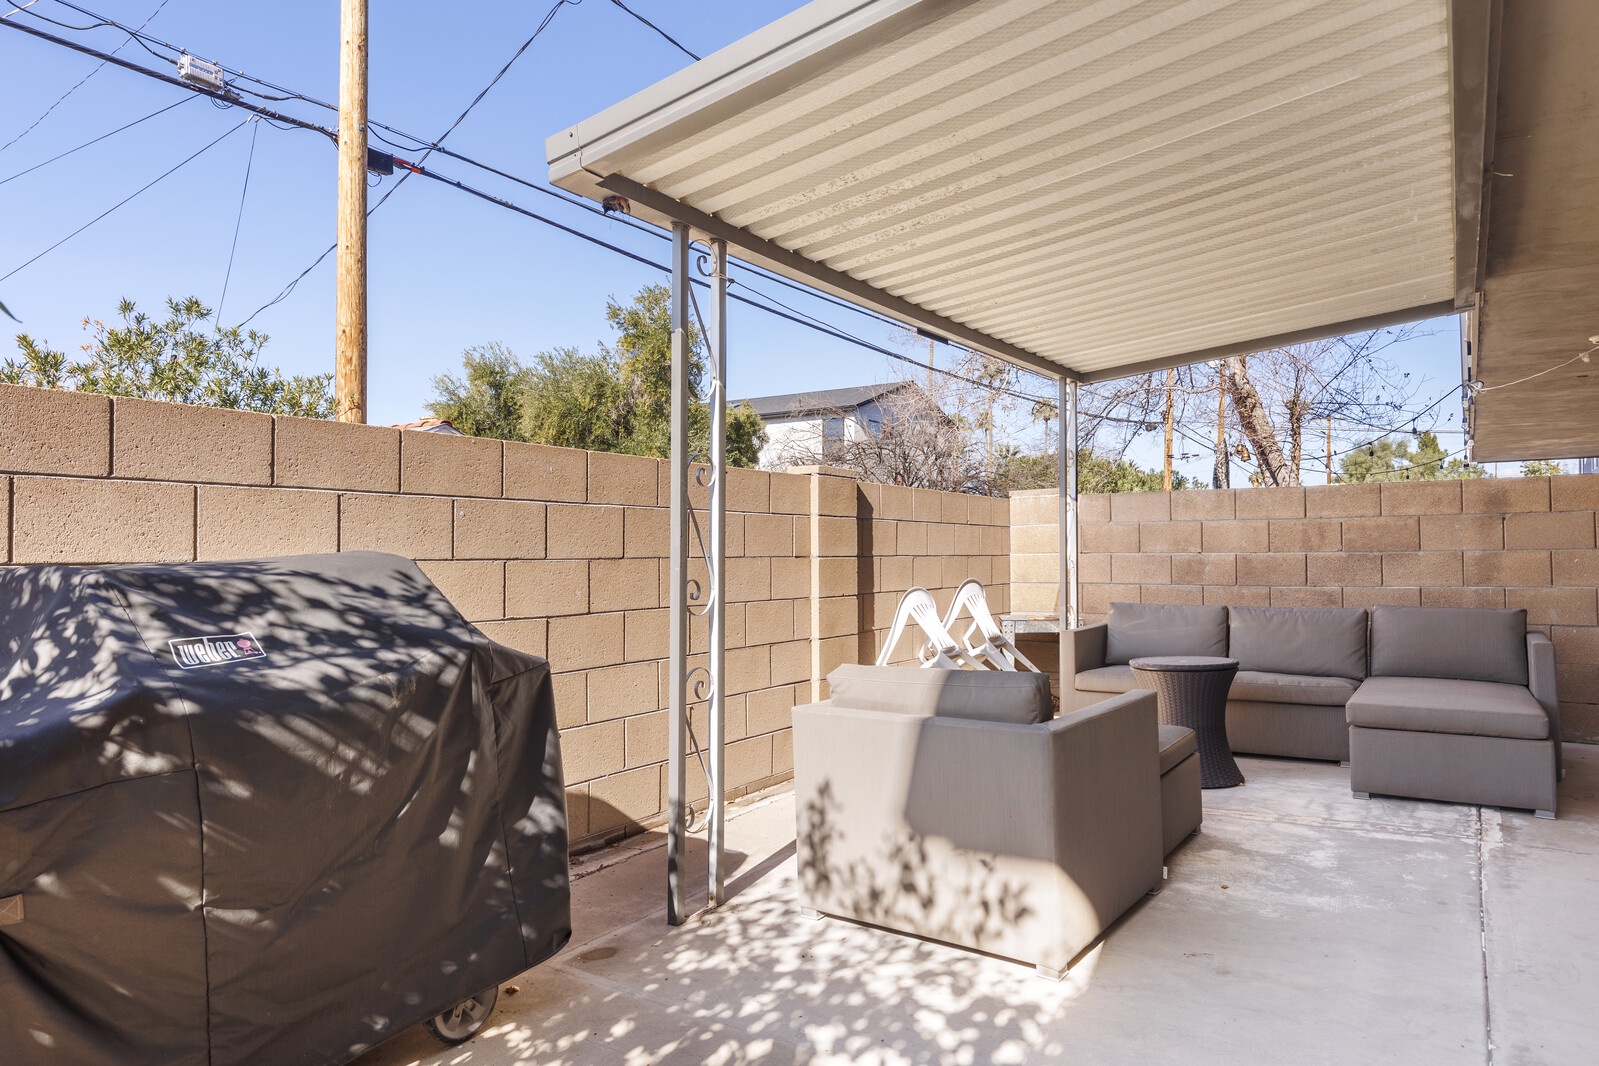 Back patio with covered lounge area and grill